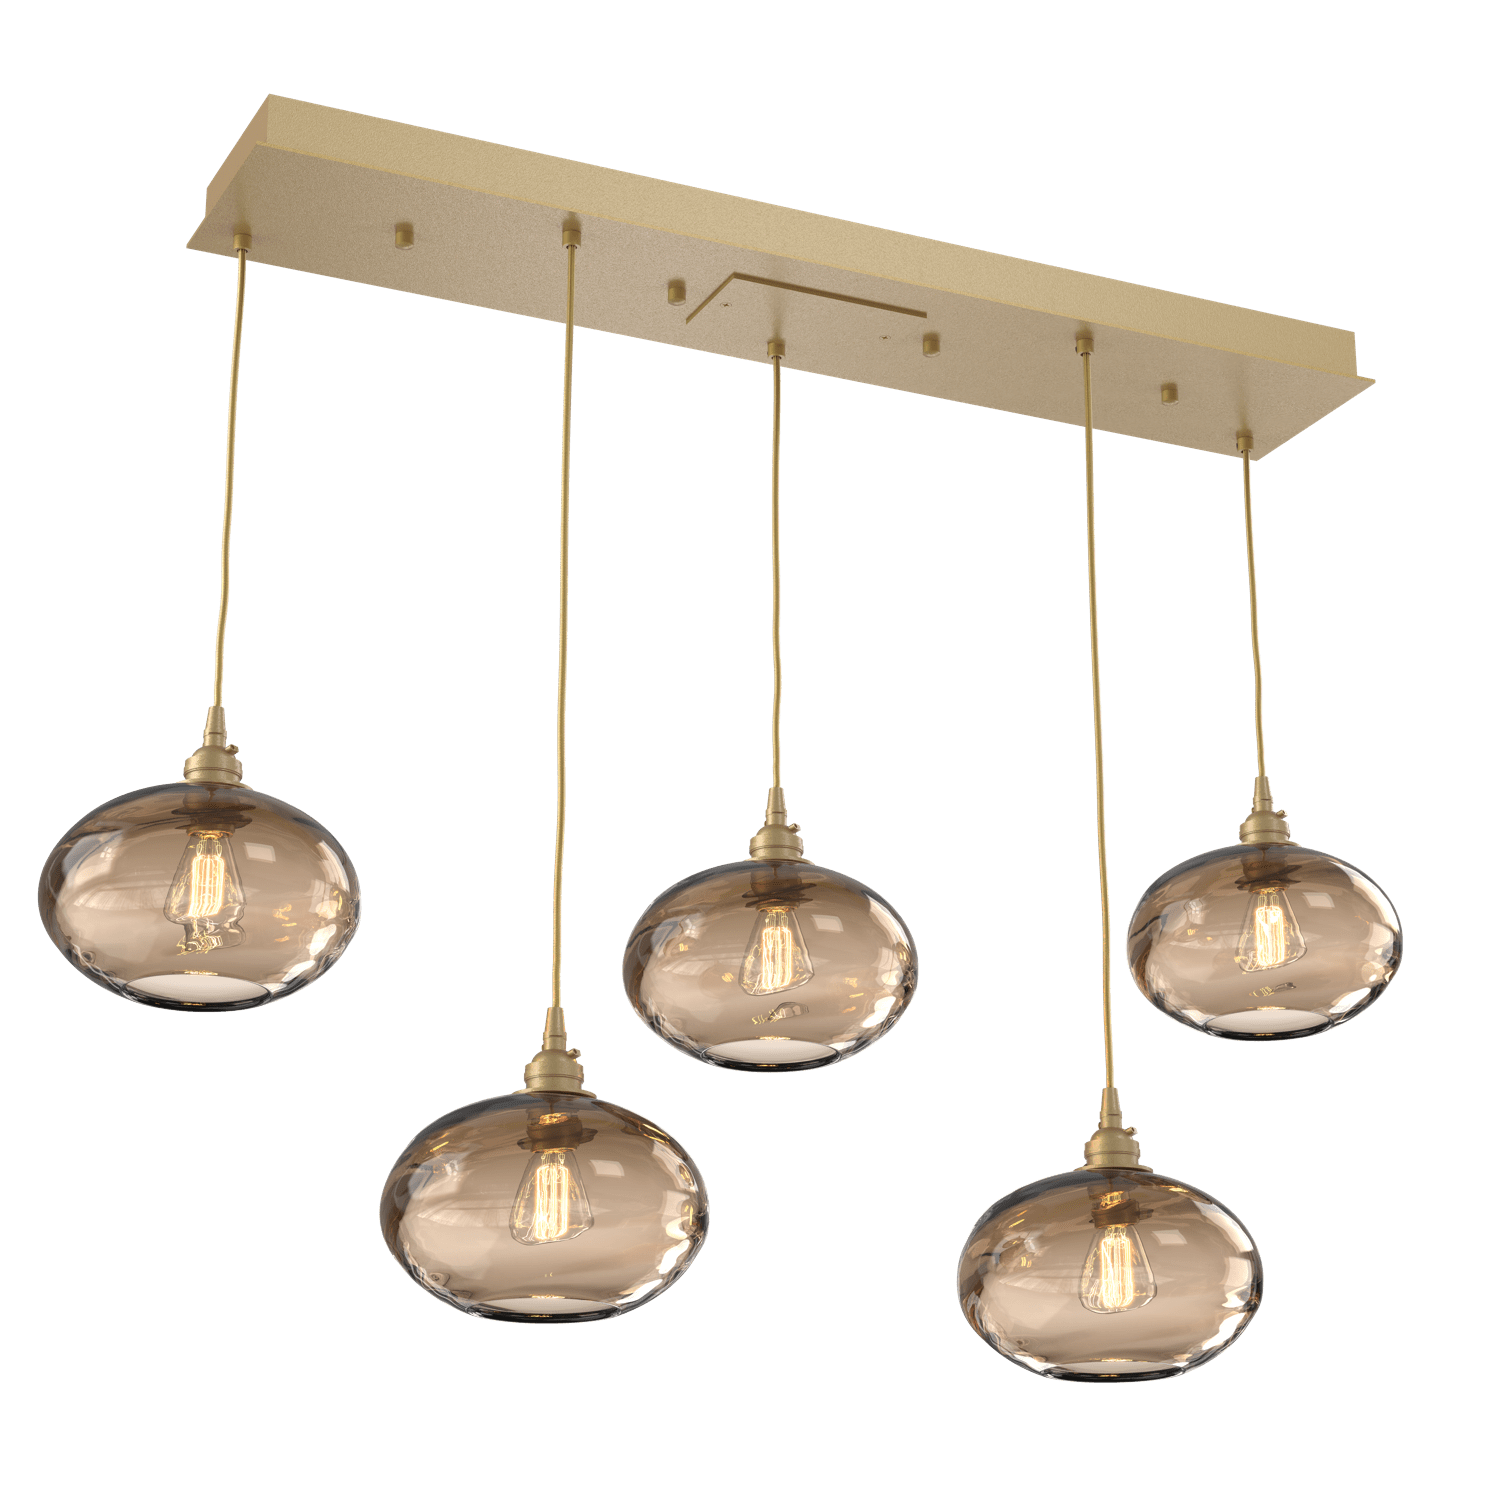 PLB0036-05-GB-OB-Hammerton-Studio-Optic-Blown-Glass-Coppa-5-light-linear-pendant-chandelier-with-gilded-brass-finish-and-optic-bronze-blown-glass-shades-and-incandescent-lamping